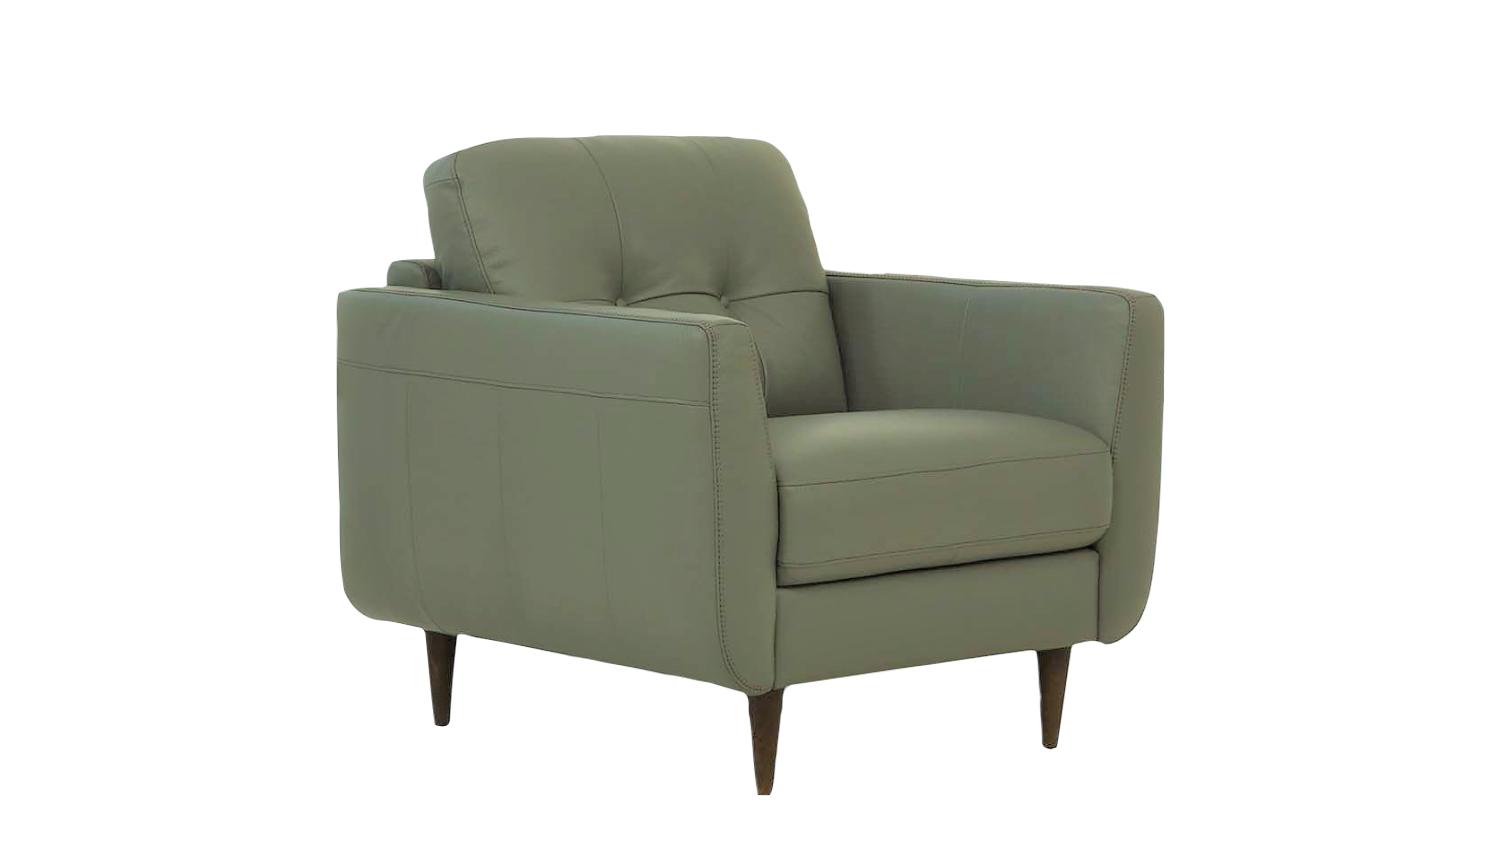 Transitional Chair Radwan 54962 in Spring green Leather